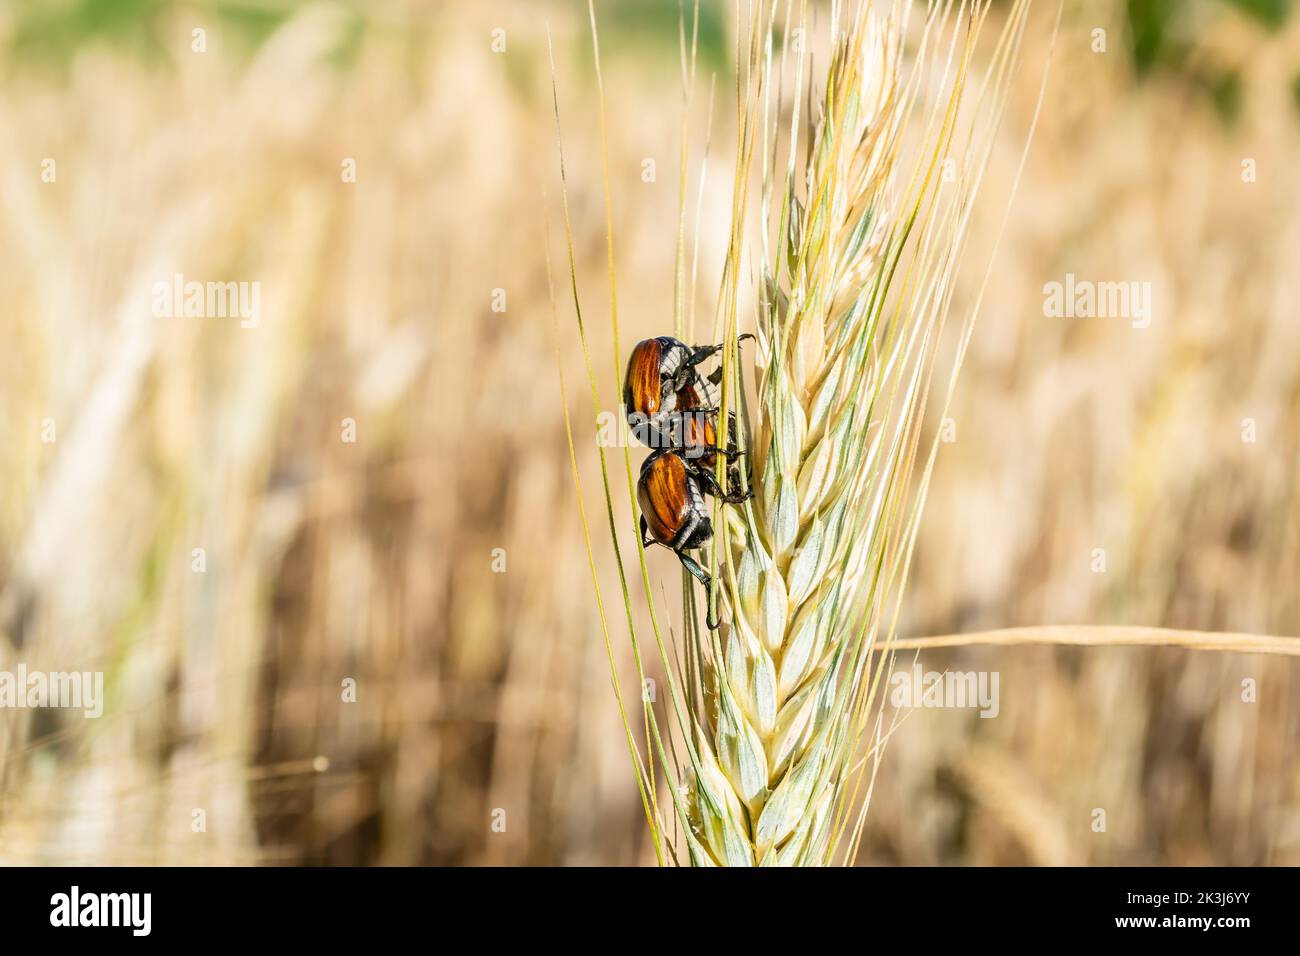 Insect pest of agricultural crops Grain Beetle lat. Anisoplia Austriaca on the wheat ear on background of a wheat field. Stock Photo